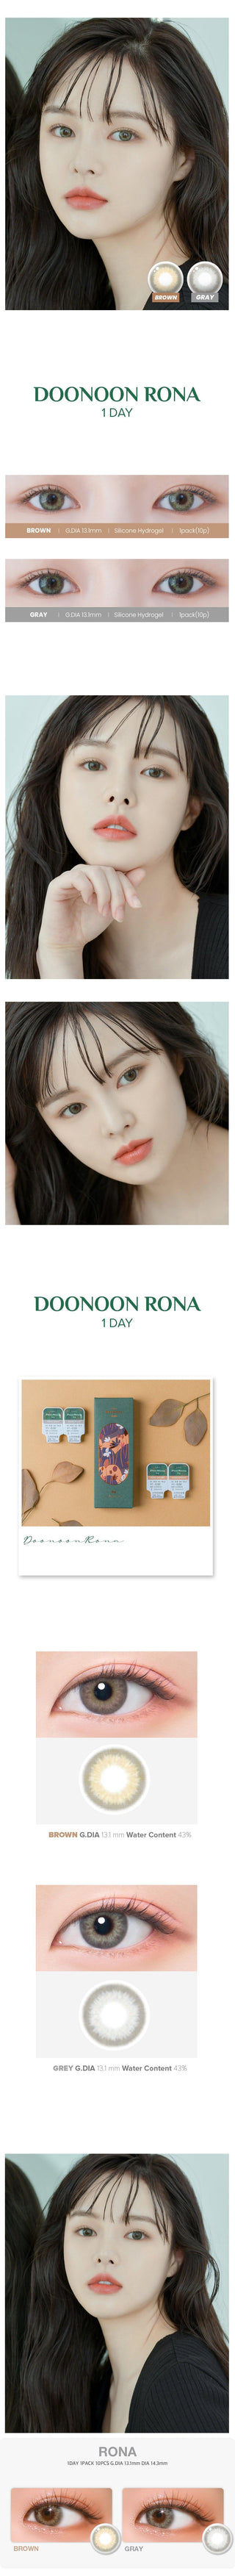 Variety of DooNoon Rona 1-Day Brown (10pk) contact lens colors displayed, with closeups of an eye wearing the contact lens colors, and with a model wearing the contact lens colors showing realistic eye-enlarging effect from various angles.